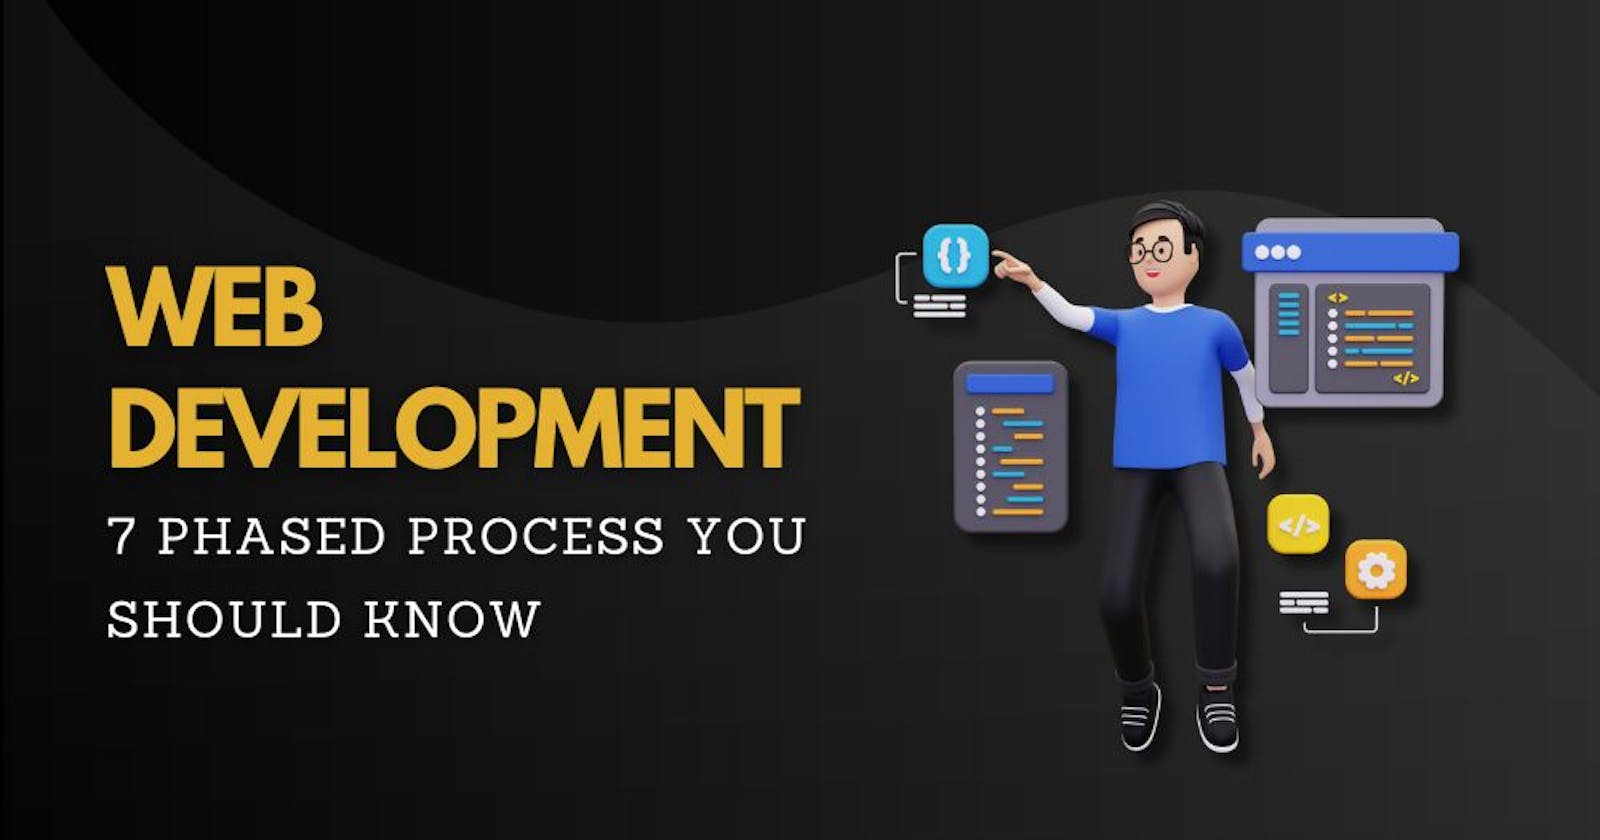 Web Development: 7-Phased Process You Should Know